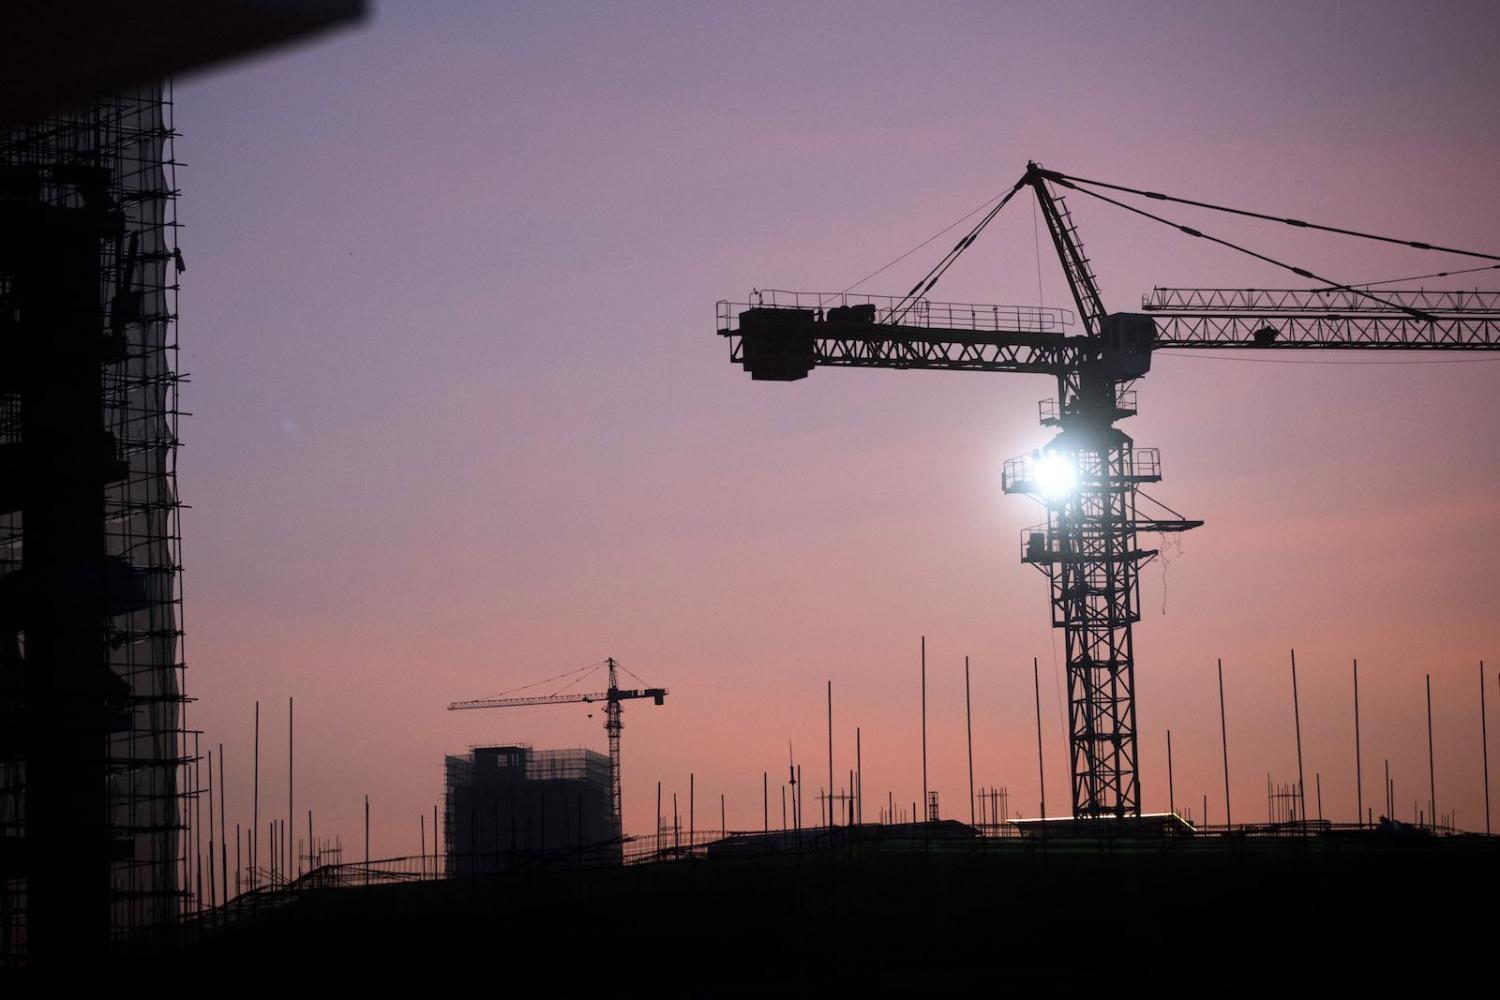 Cranes stand on a construction site at dawn in Sihanoukville, Cambodia, part of an infusion of Chinese-built infrastructure (Photo: Brent Lewin via Getty)